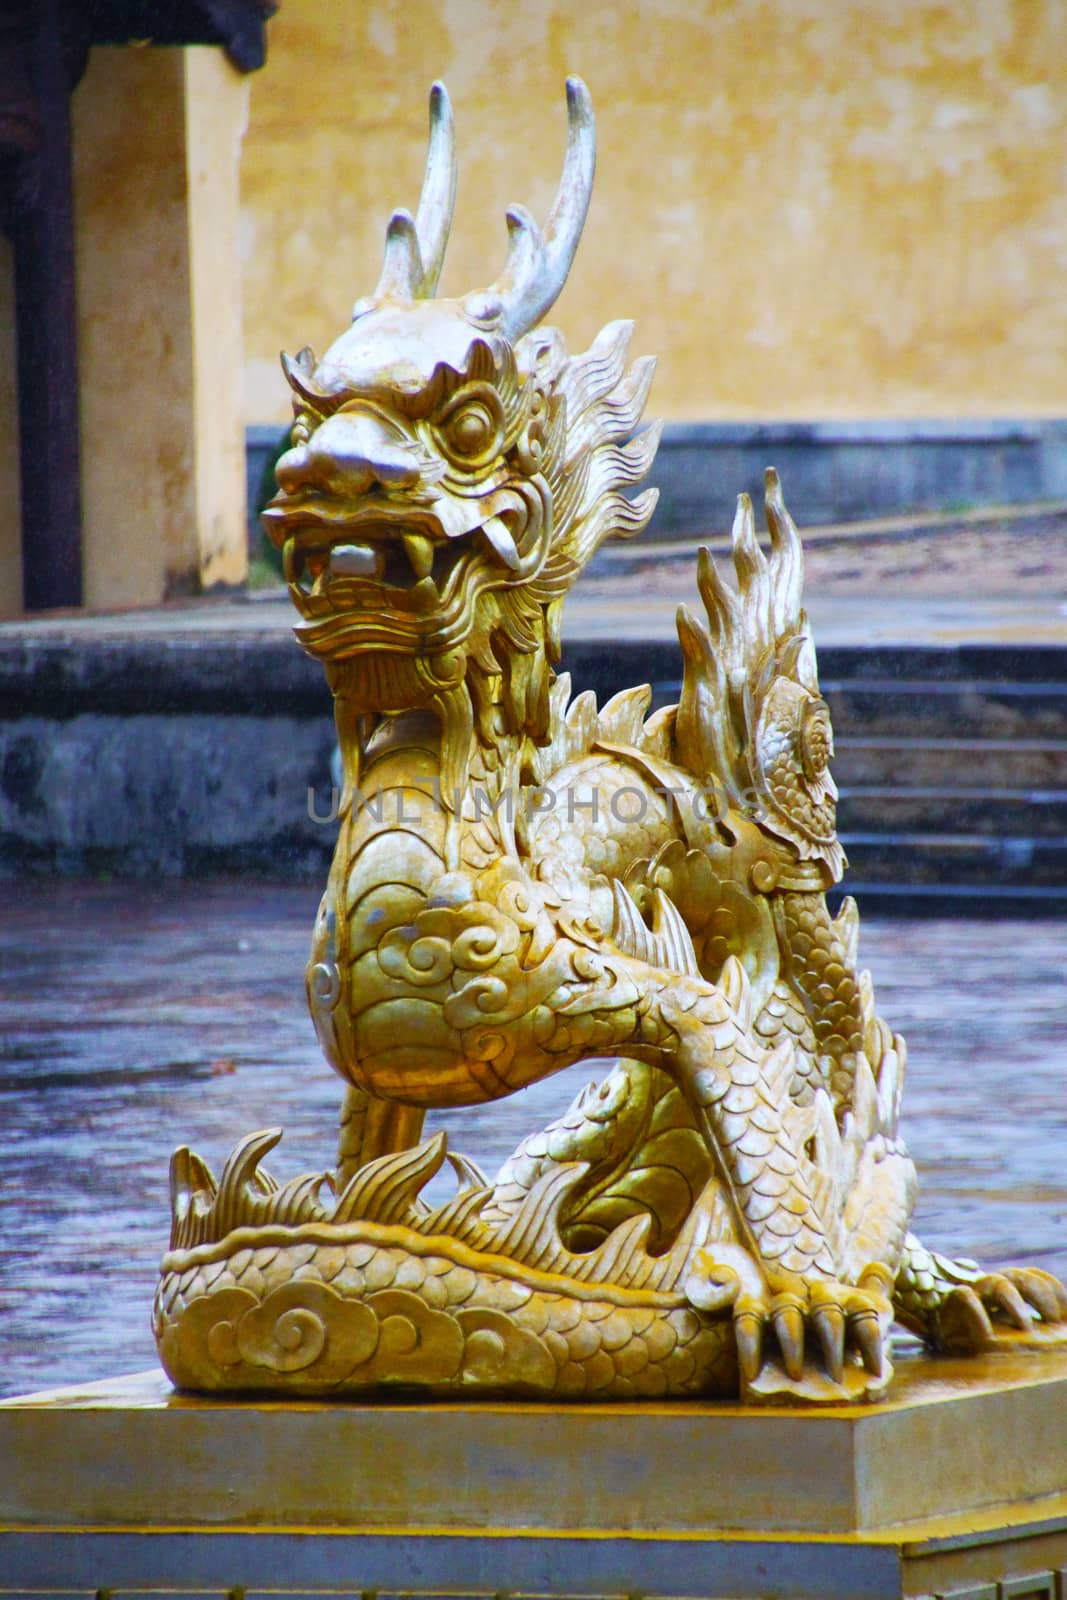 Statue of a dragon in Hue, Vietnam by tboyajiev